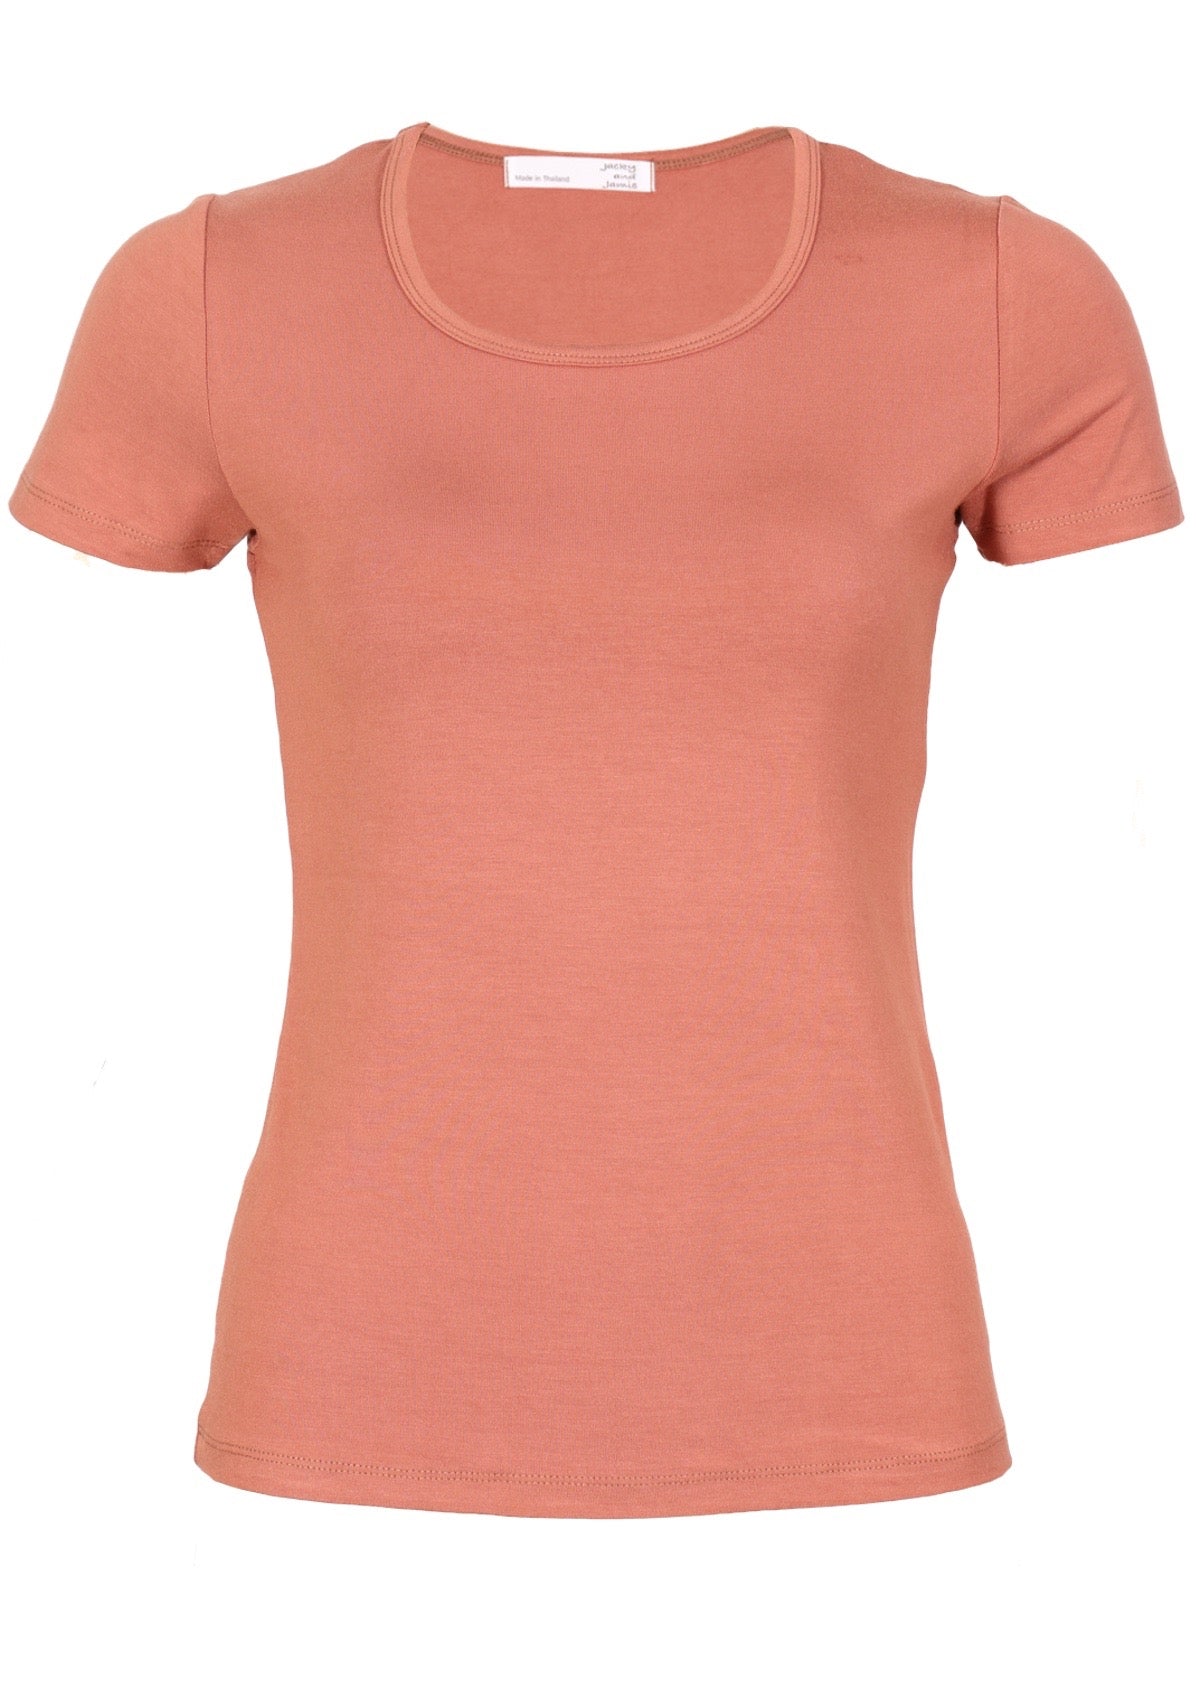 Women's scoop neck dusty pink rayon fitted t-shirt on white background.